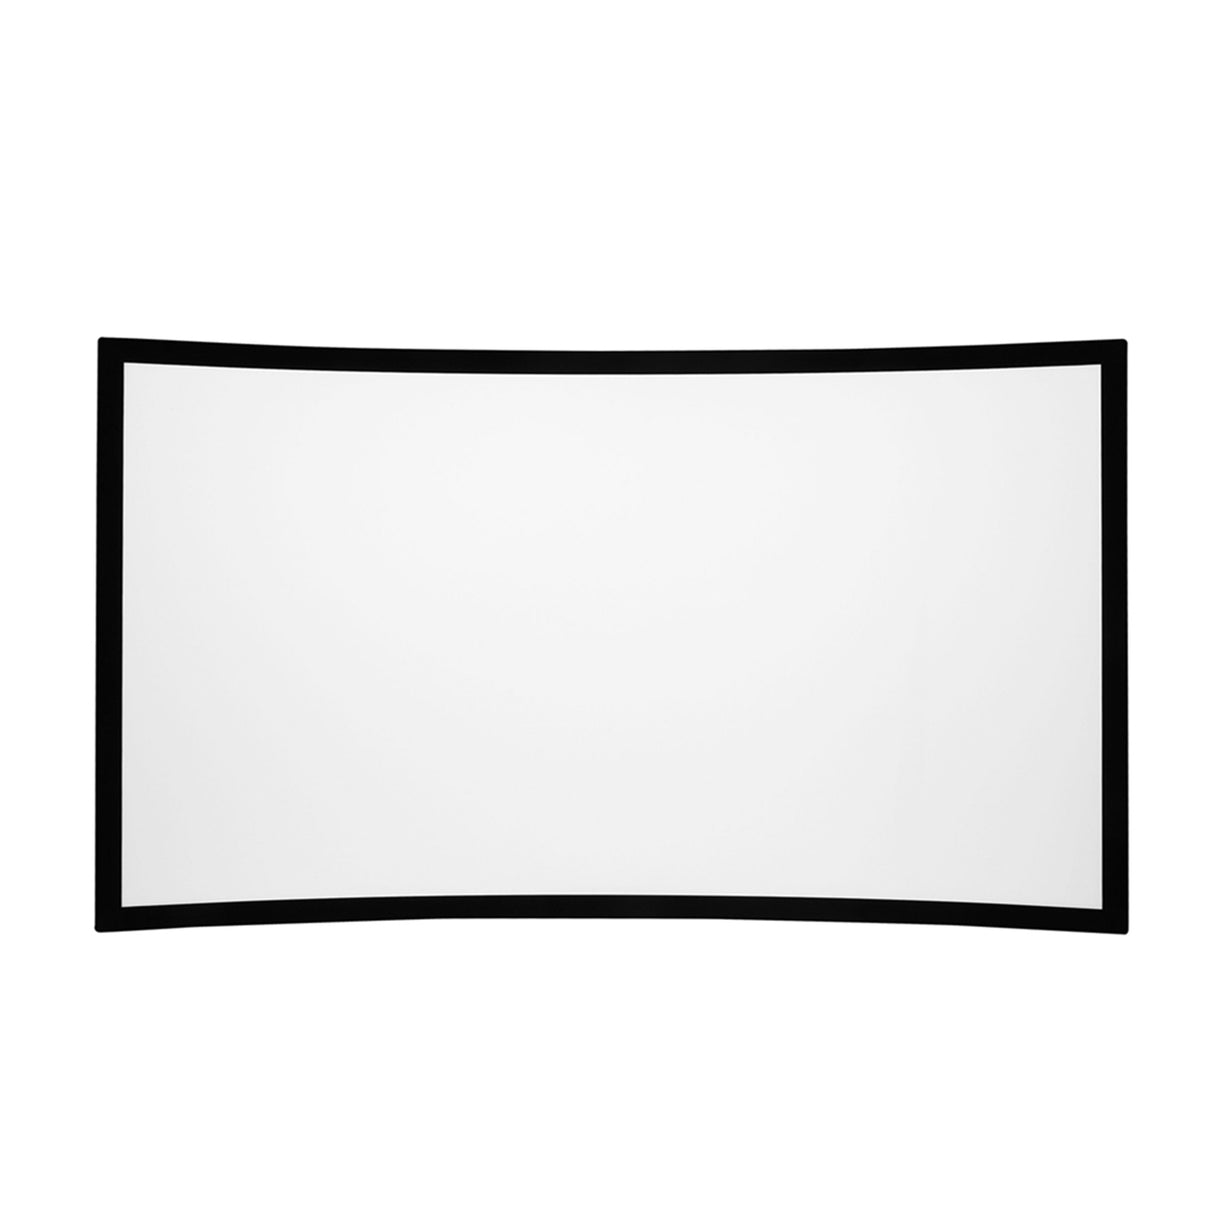 Prime Fixed-frame Curved projector screen with acoustically transparent perforated white fabric (220")